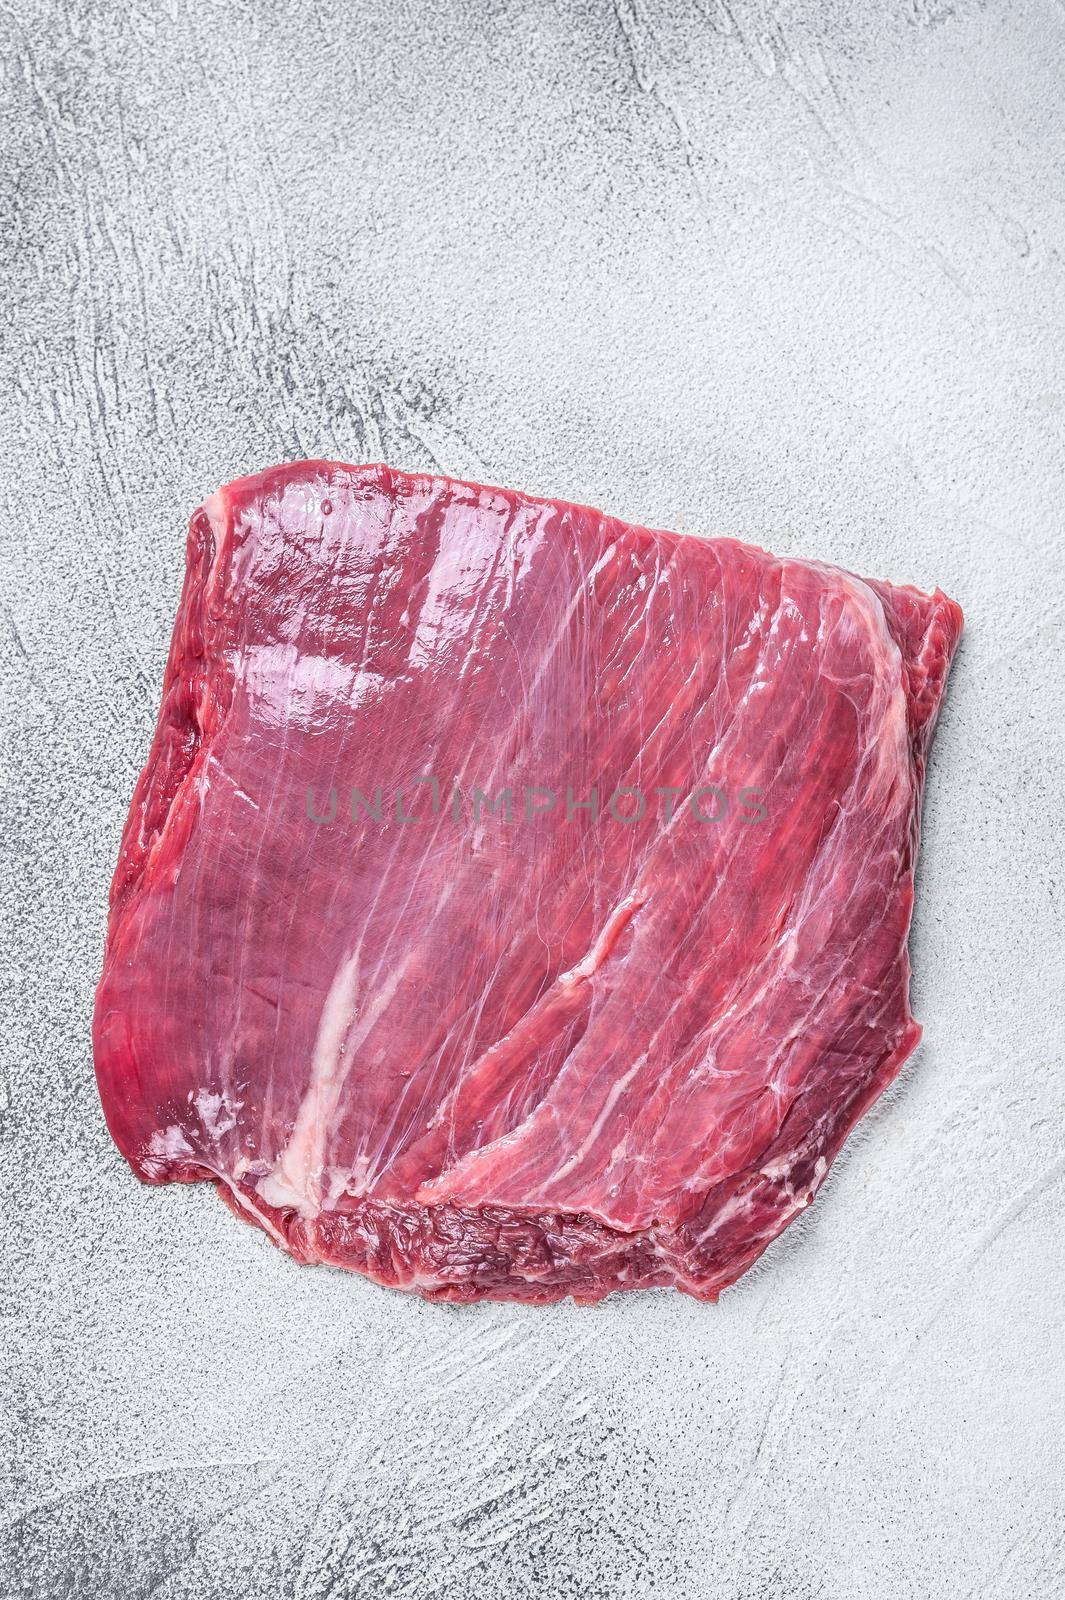 Raw flank or flap beef meat steak. White background. Top view.